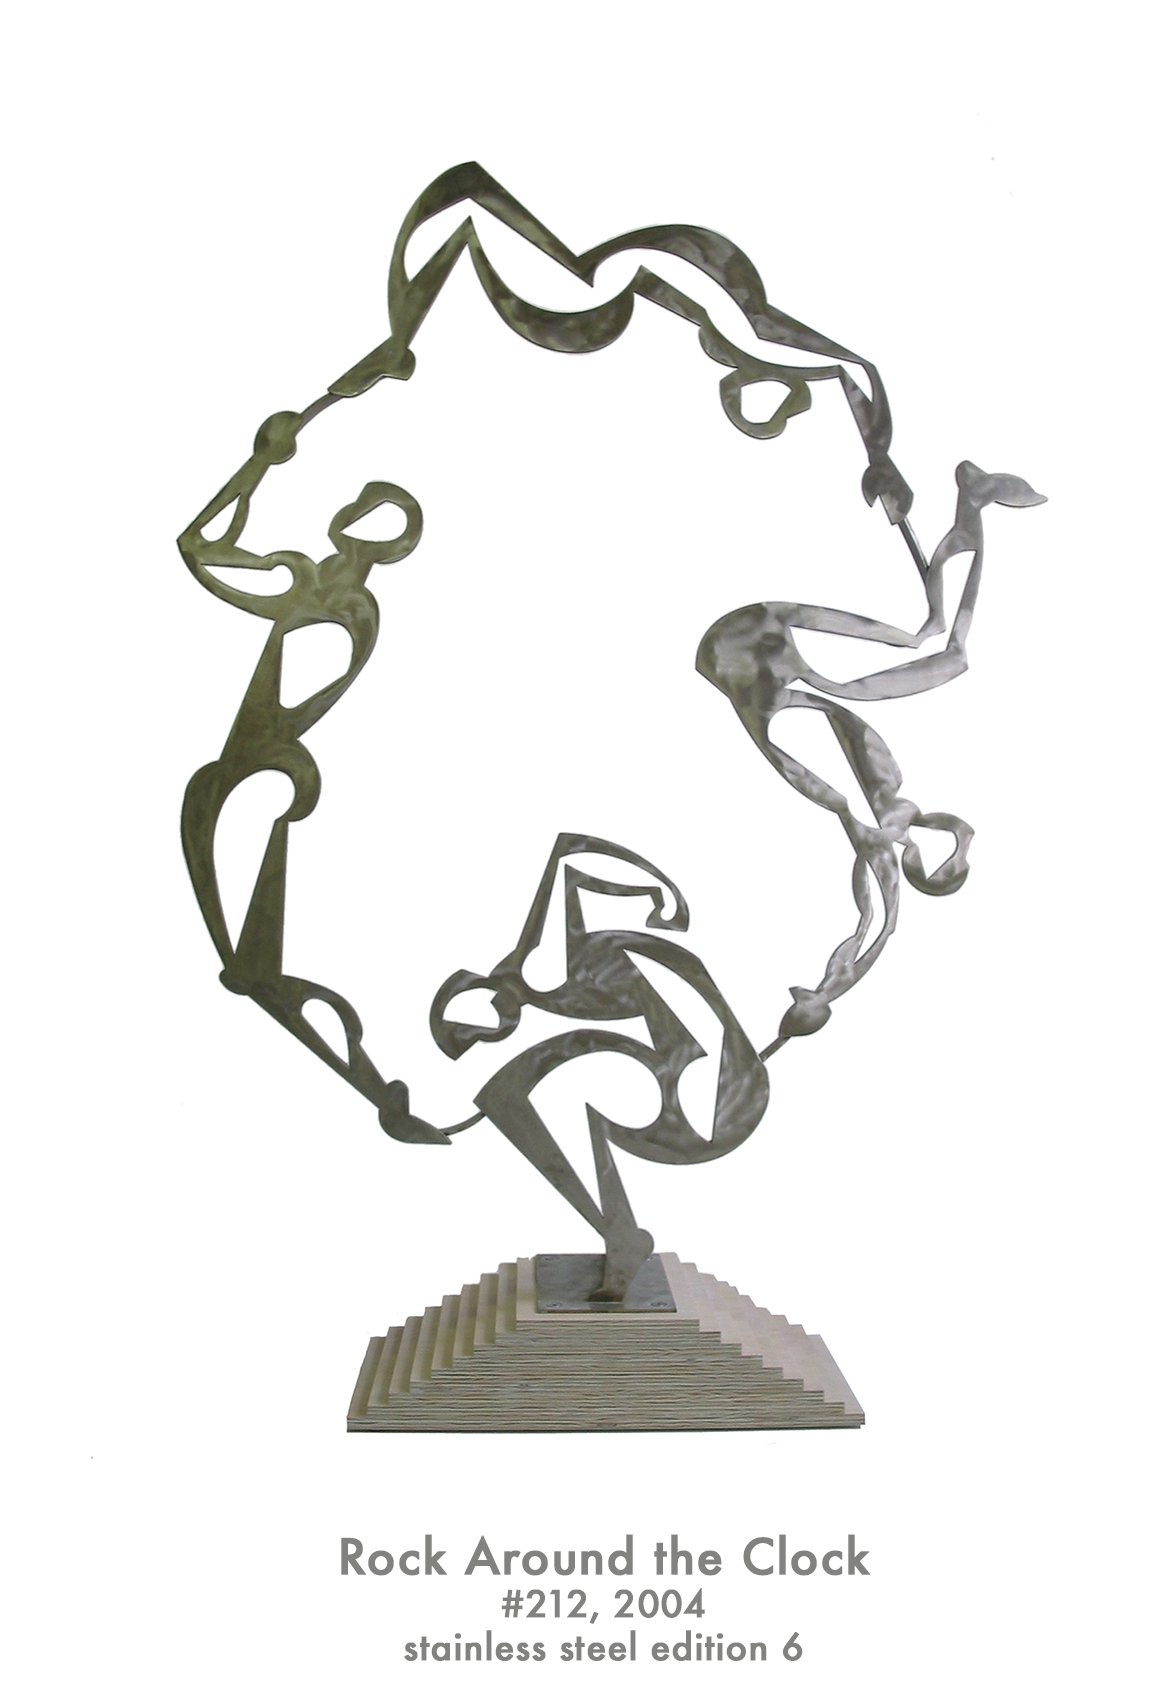 Rock Around the Clock, 2004, stainless steel, #212 